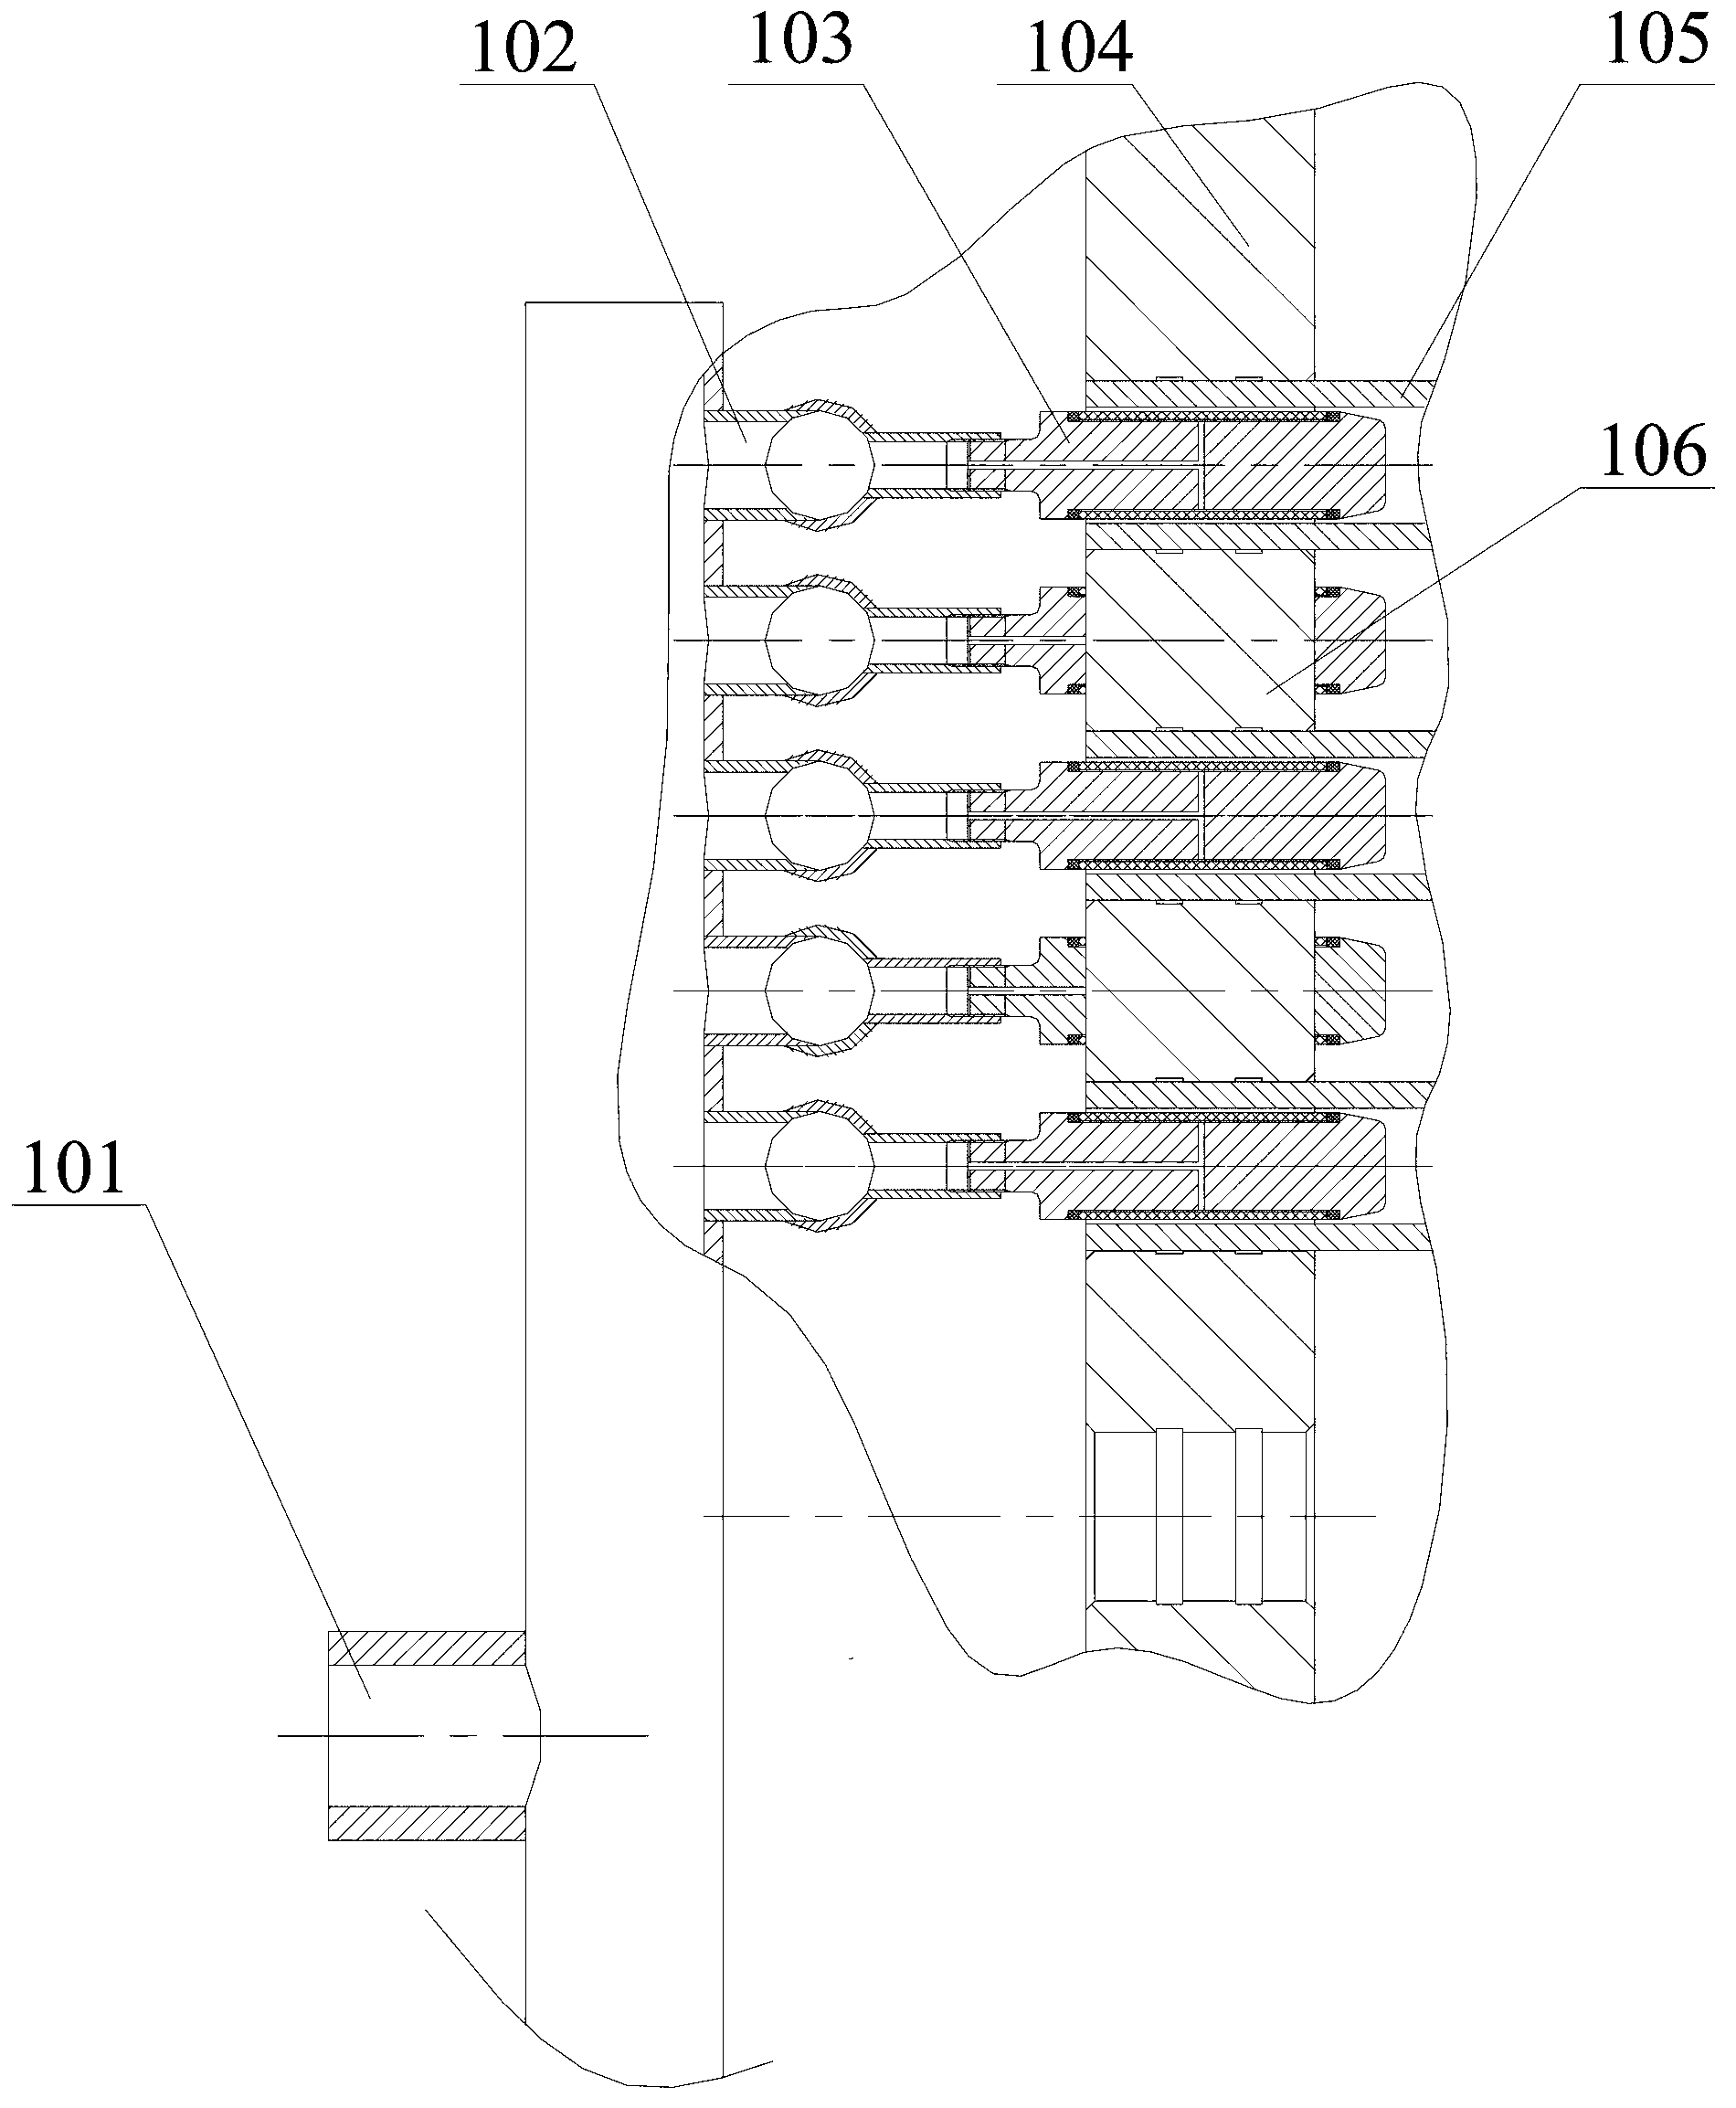 Porous expanded connection device